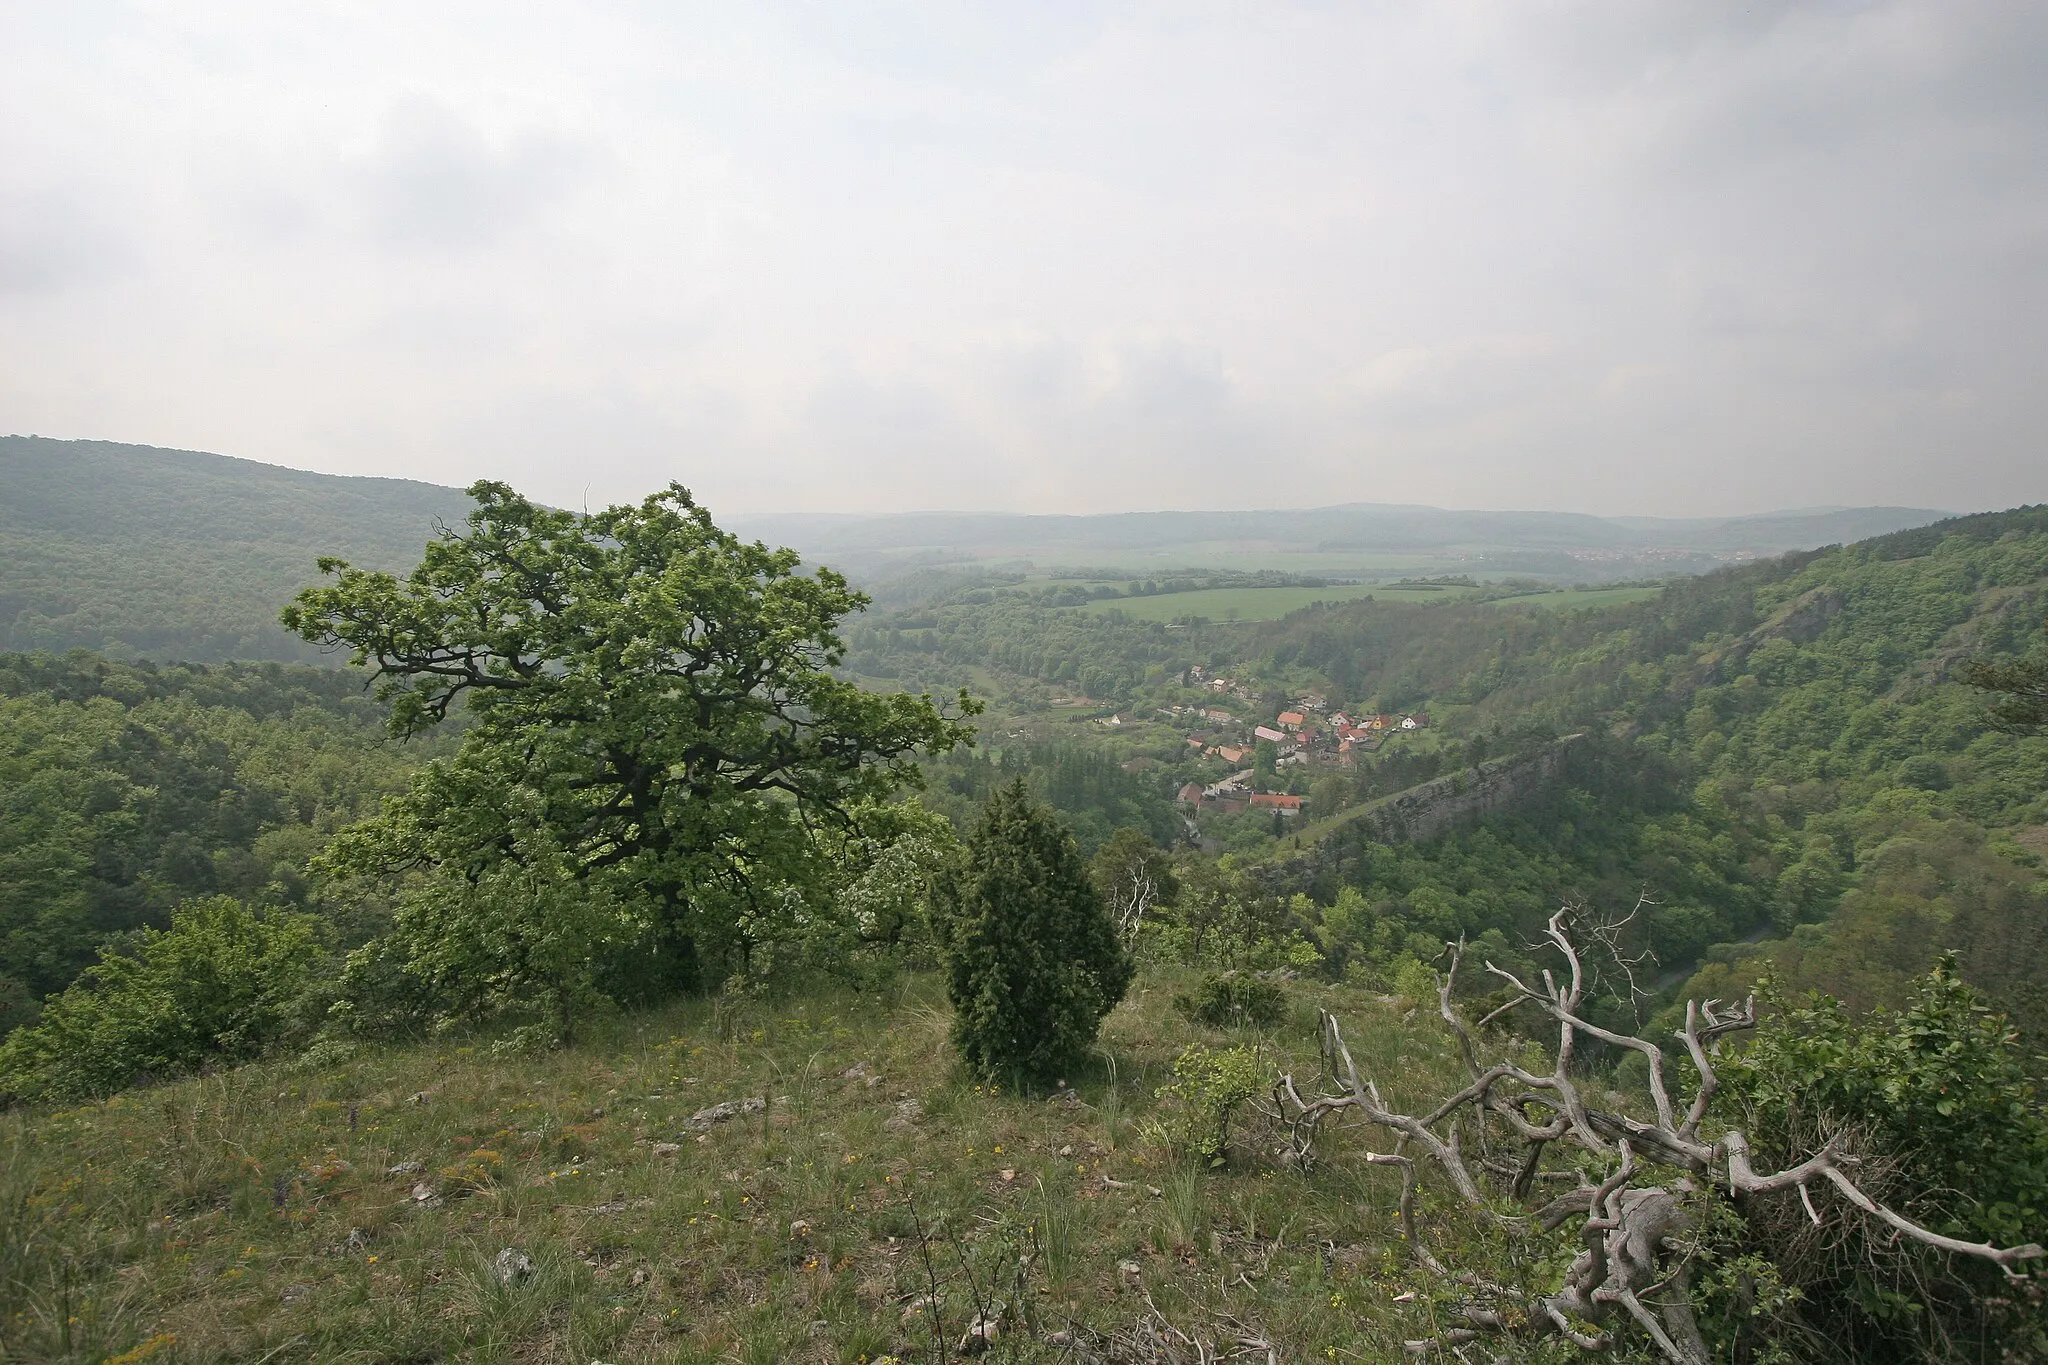 Photo showing: Hostim vyhlídka nad Třesinou
Camera location 49° 57′ 51.84″ N, 14° 07′ 59.09″ E View this and other nearby images on: OpenStreetMap 49.964400;   14.133080